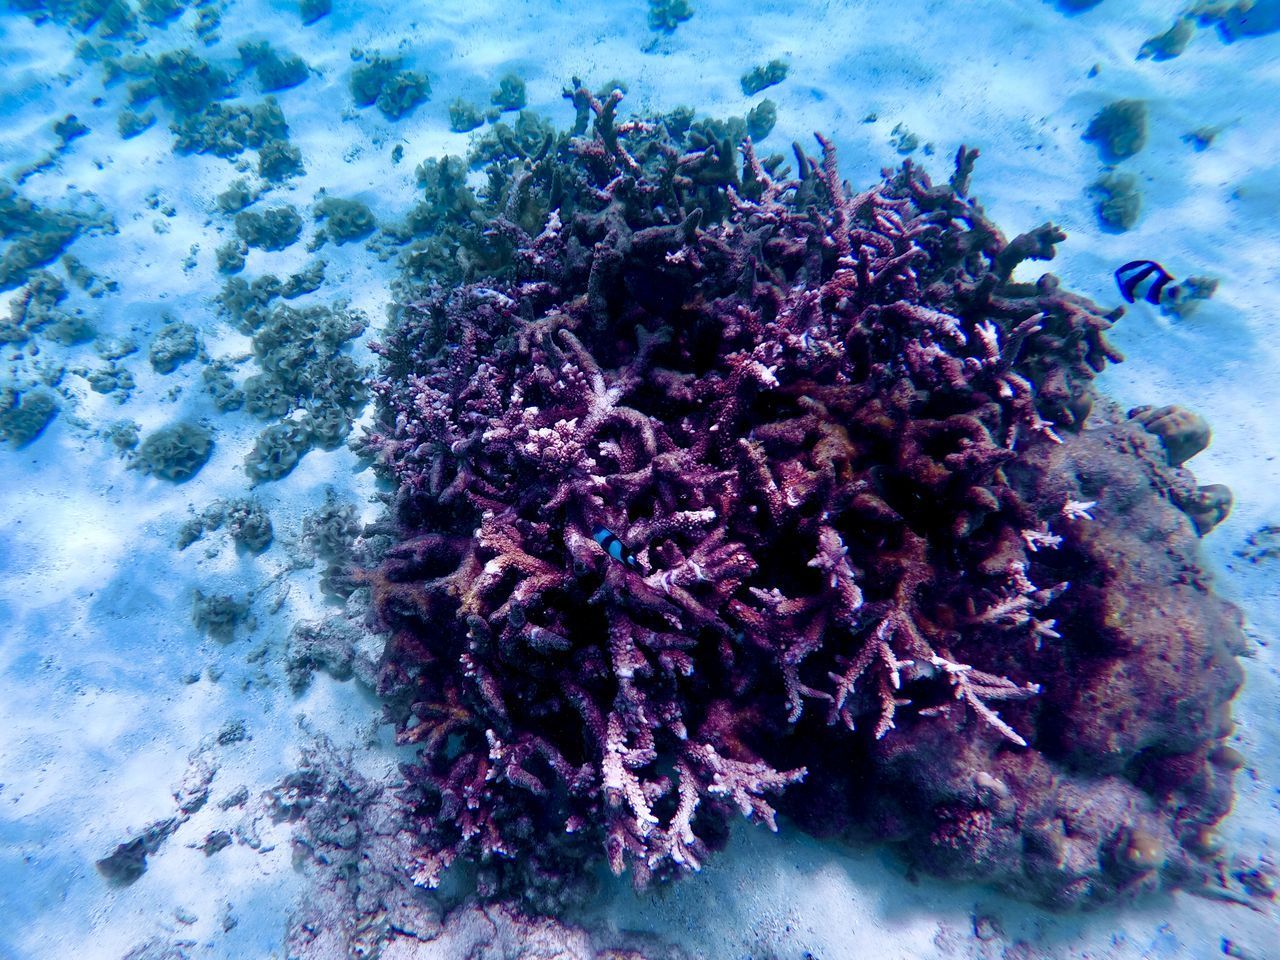 HIGH ANGLE VIEW OF CORAL SWIMMING UNDERWATER